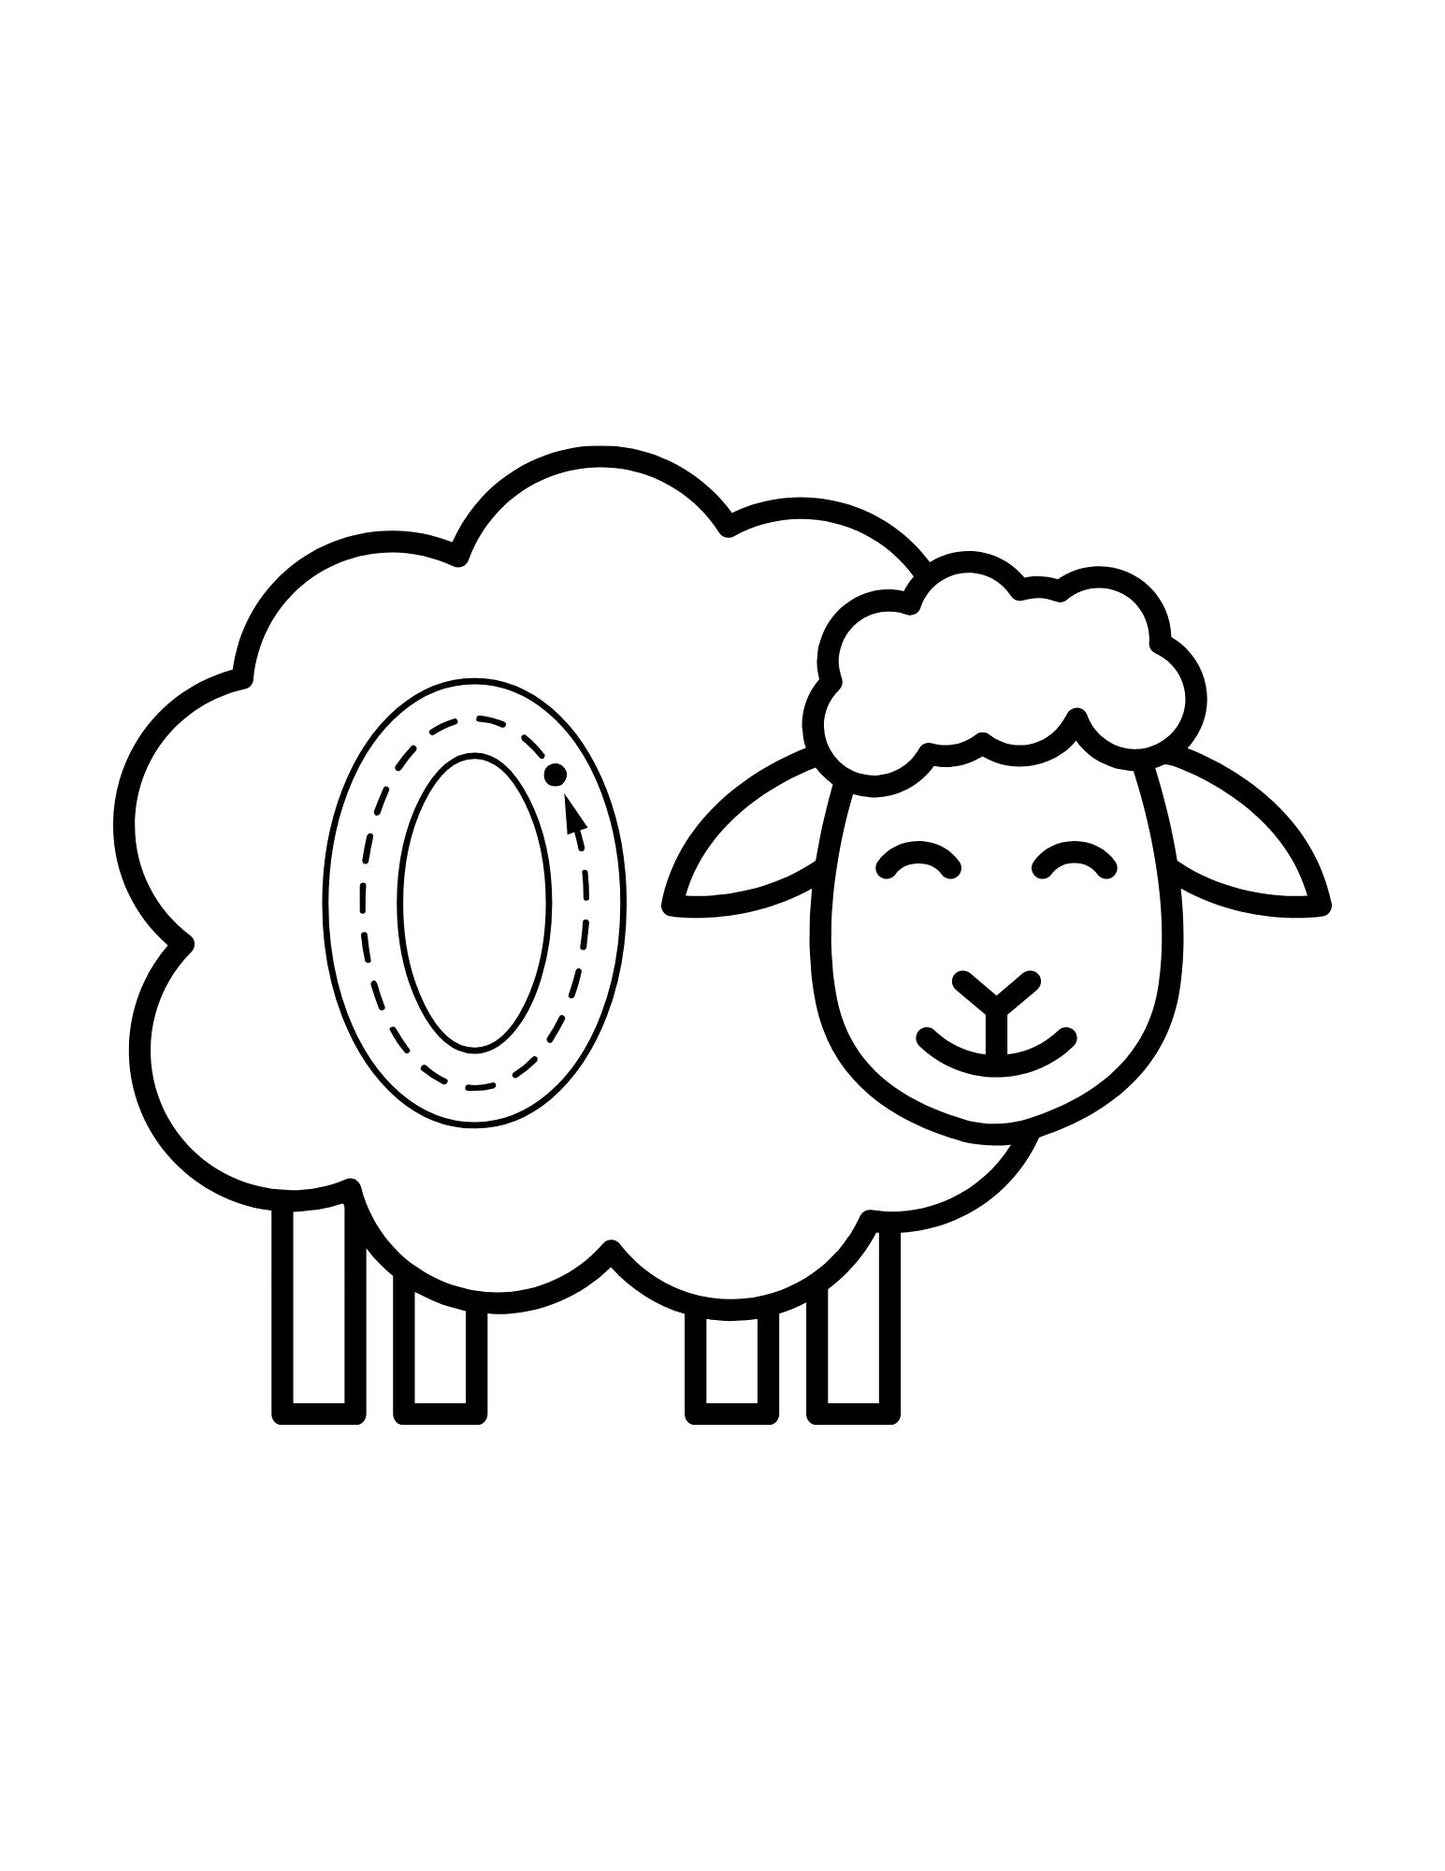 Sheep Alphabet and Number Tracing